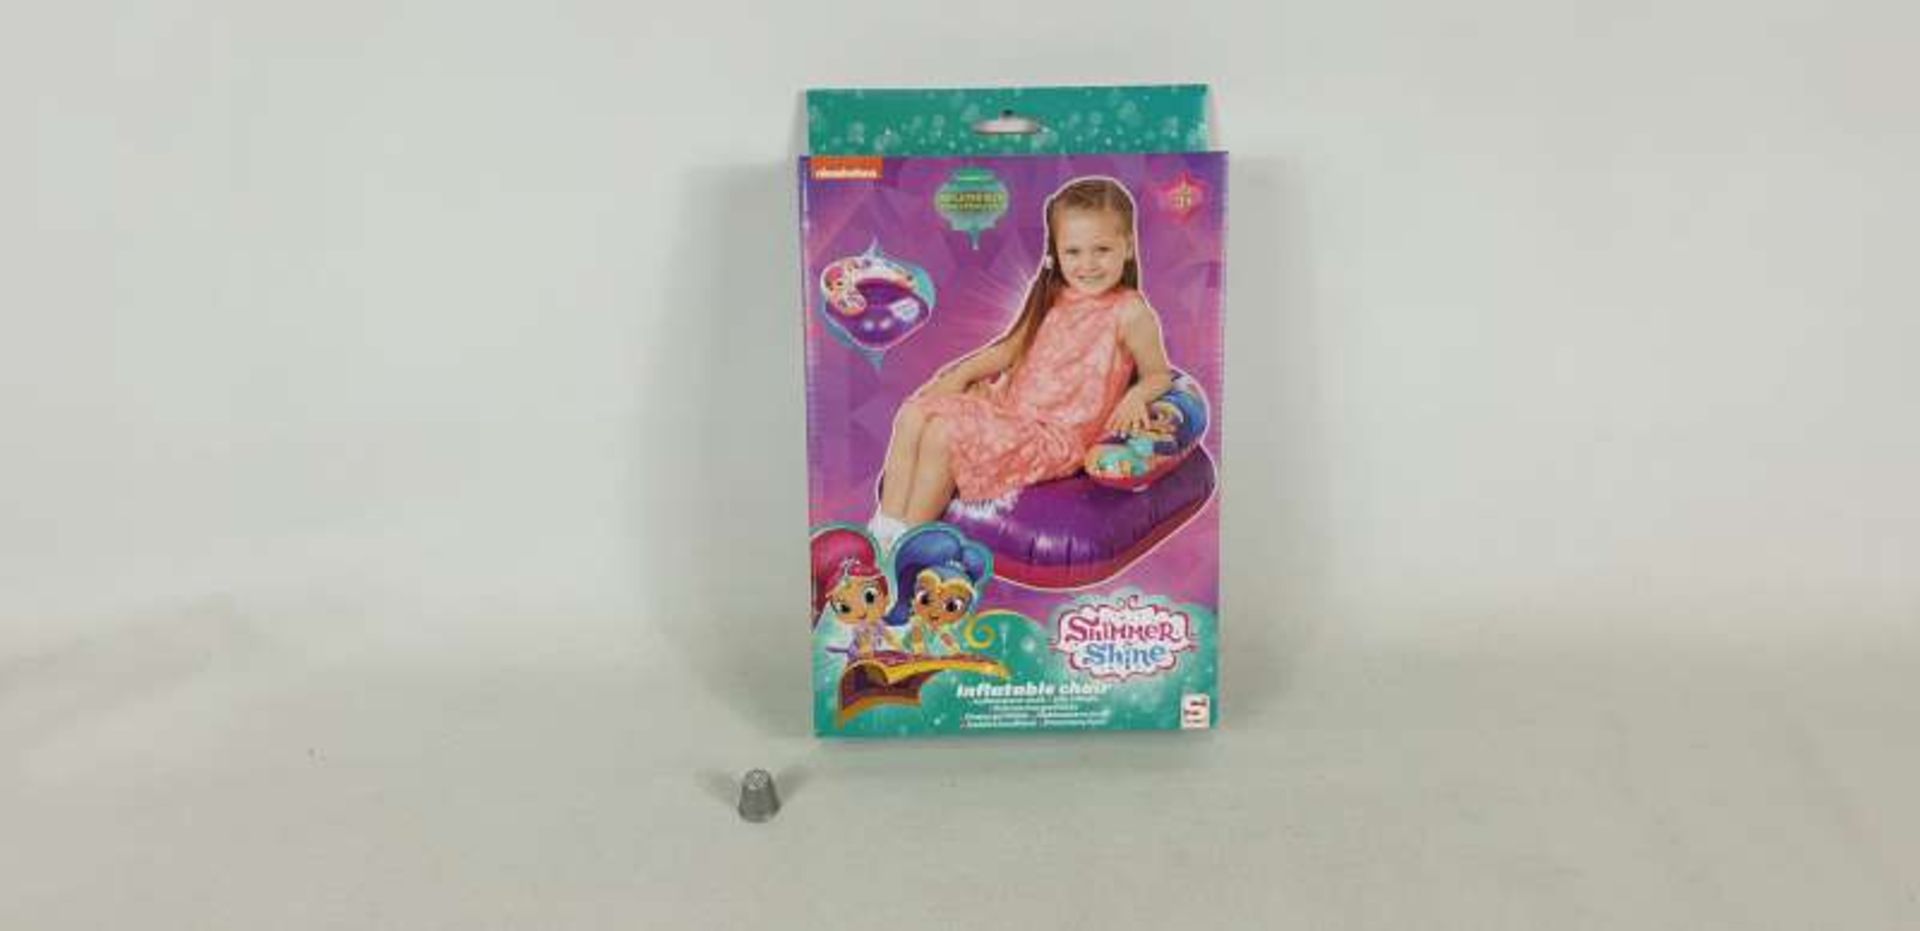 48 X SHIMMER AND SHINE LARGE INFLATABLE CHAIRS IN 2 BOXES